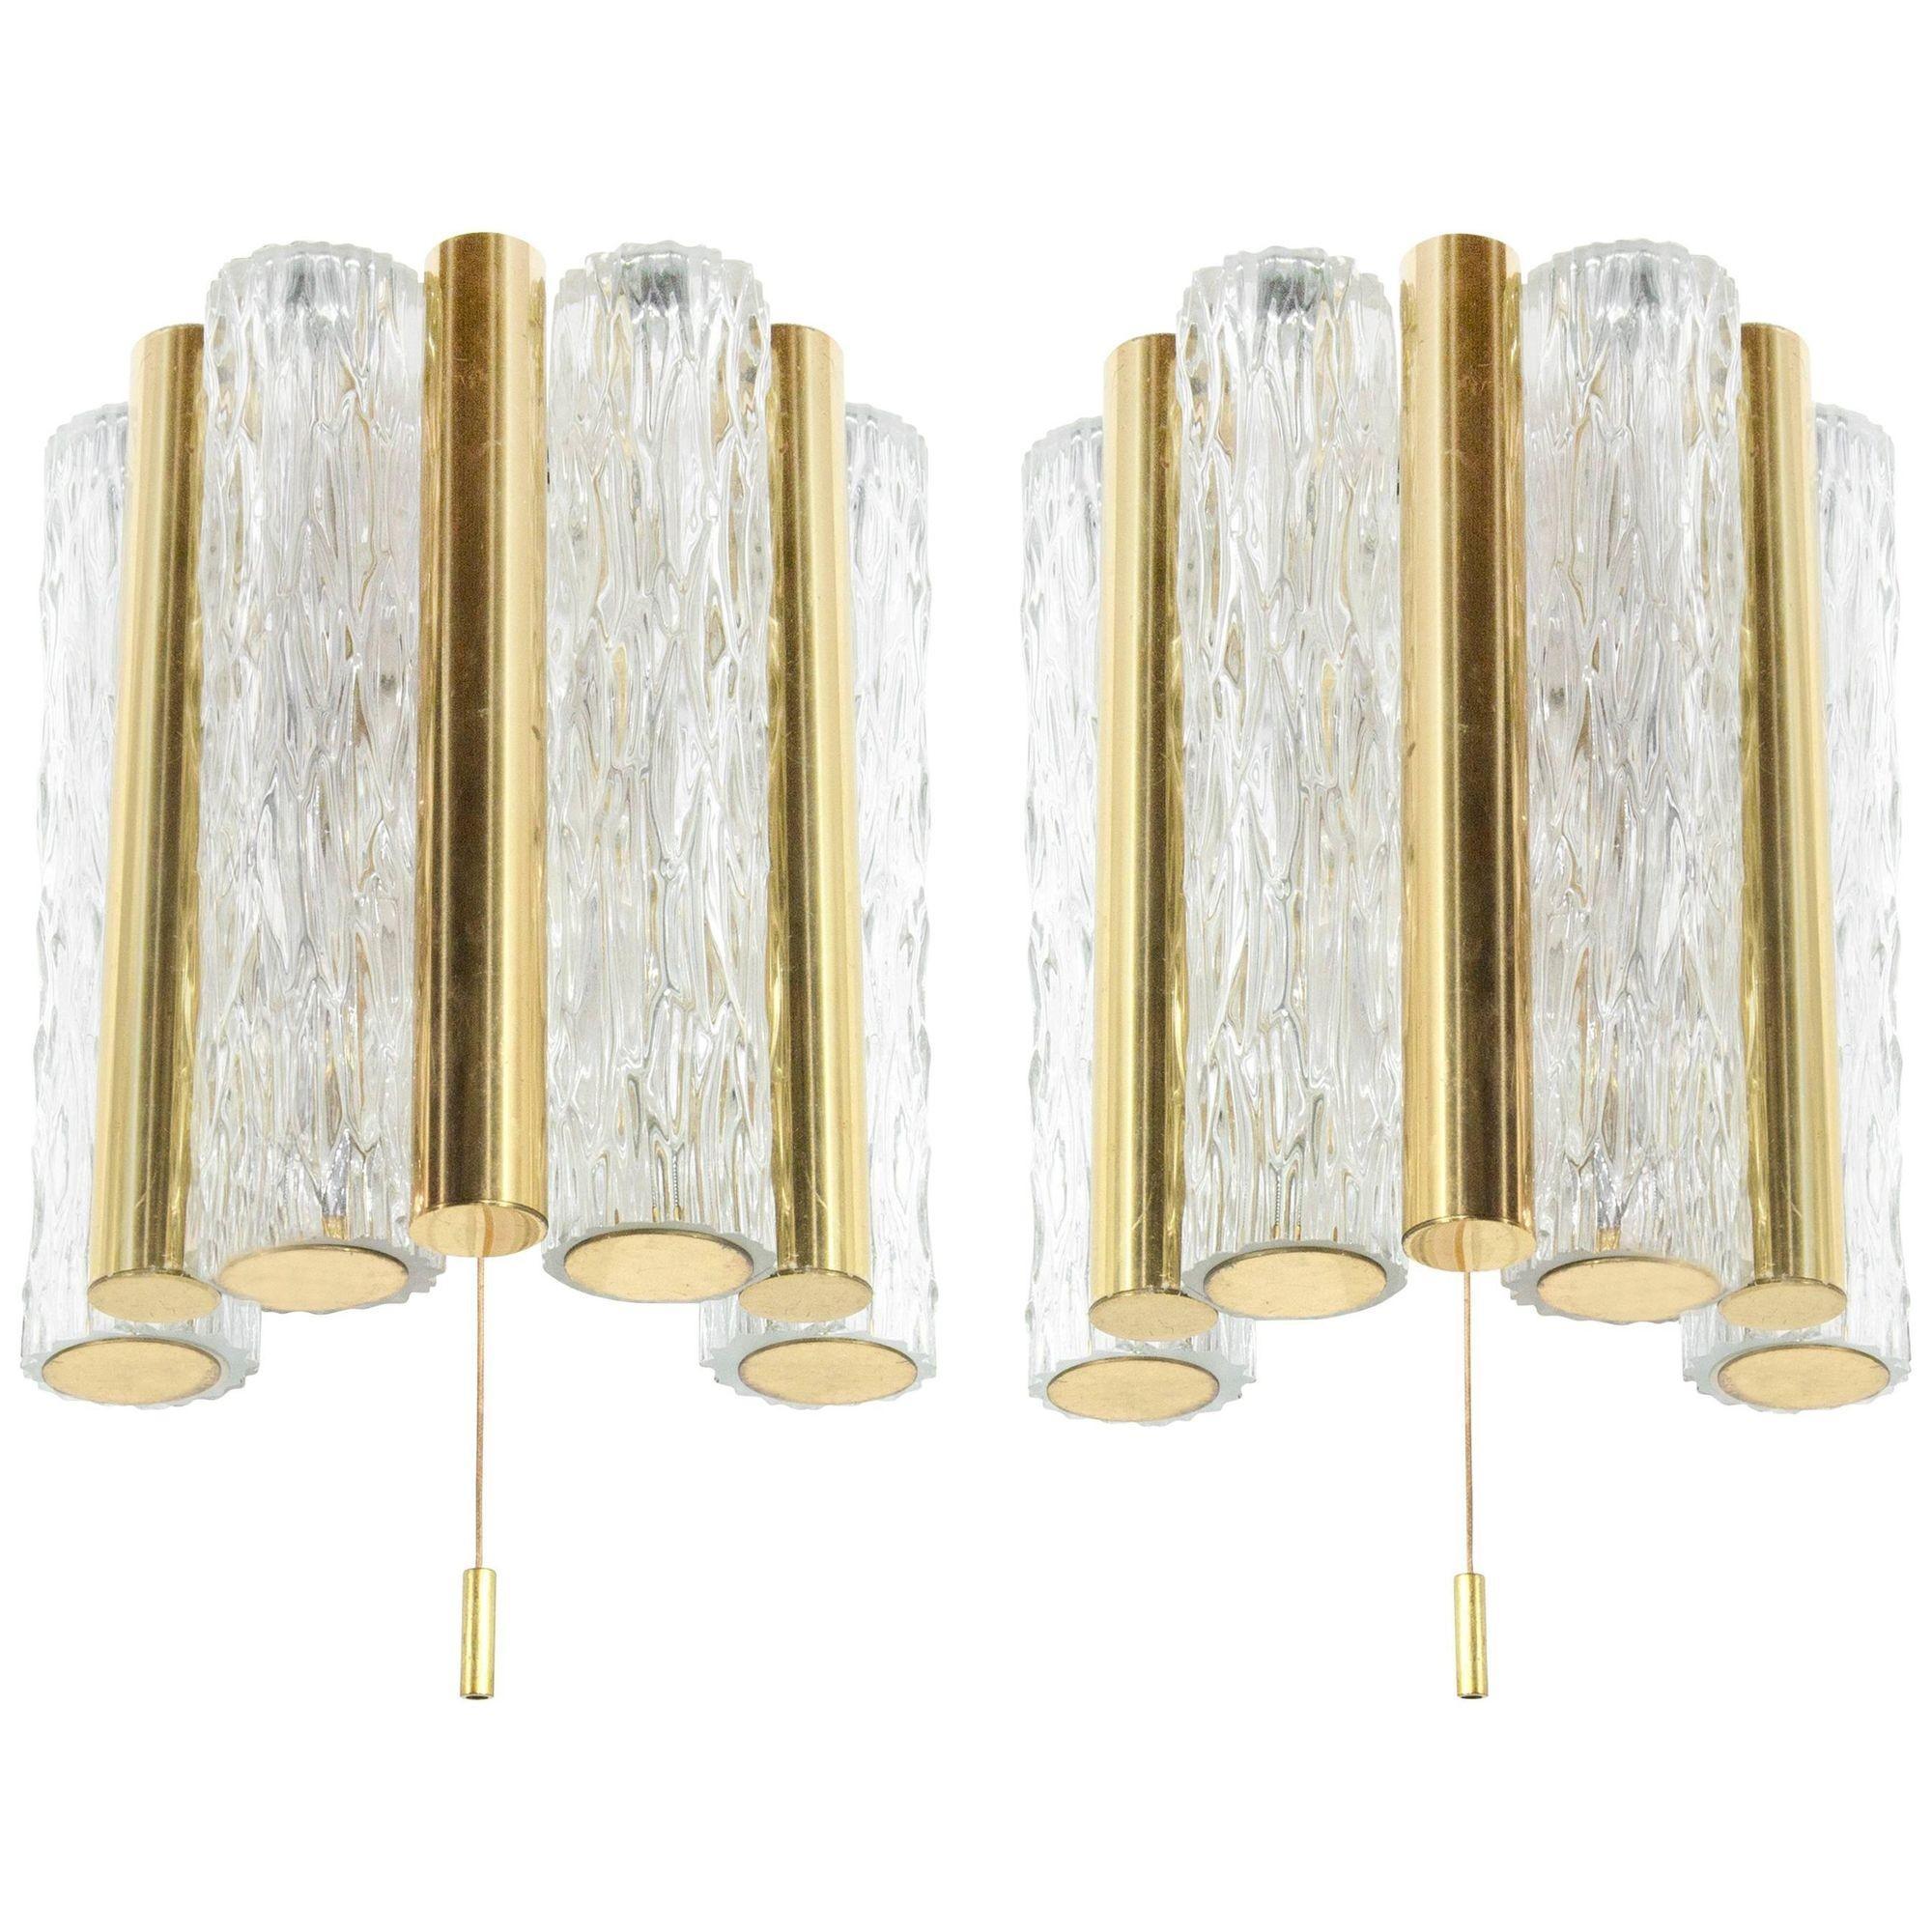 Set of Murano Glass and Brass Sconces by Doria Leuchten, Germany, C. 1960s For Sale 3